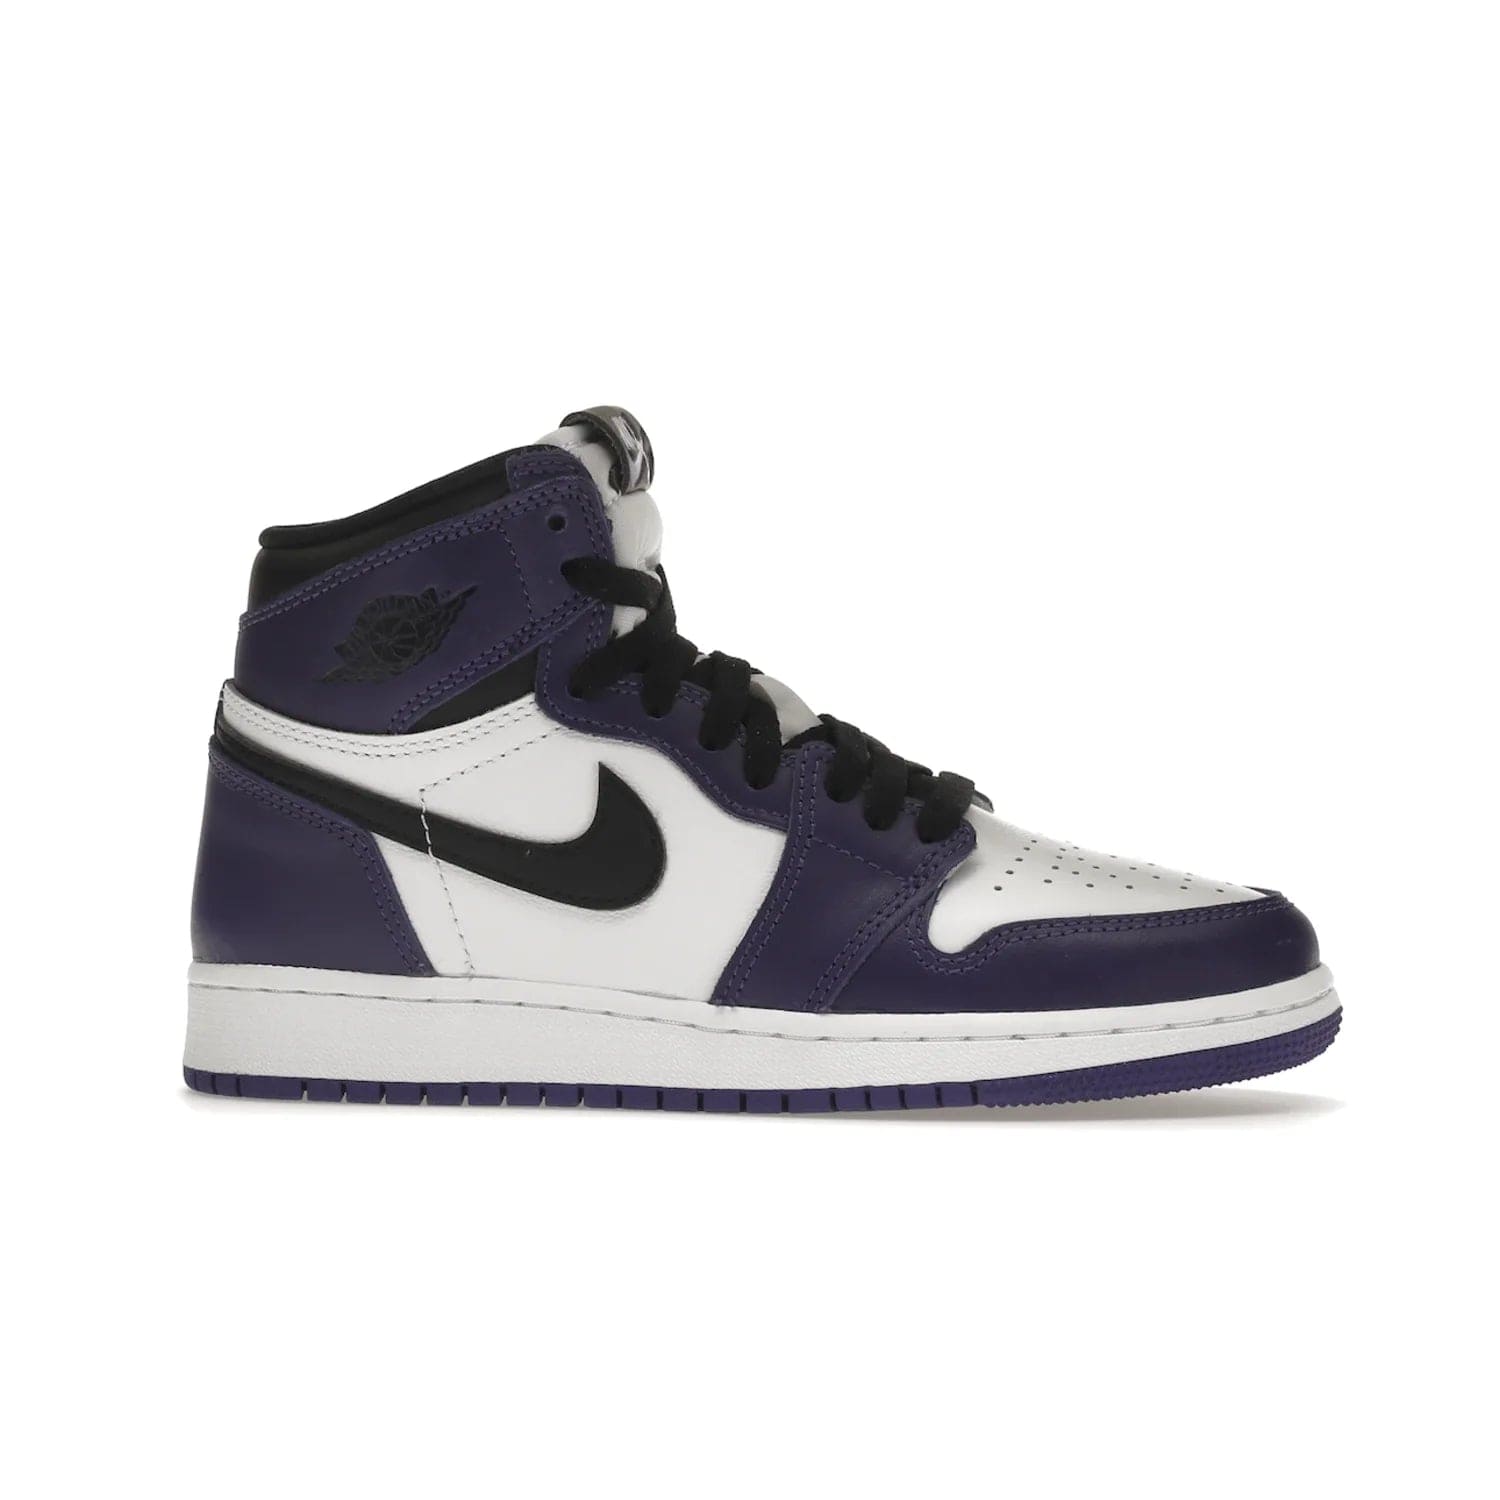 Jordan 1 Retro High Court Purple White (GS) - Image 2 - Only at www.BallersClubKickz.com - The Air Jordan 1 Retro High Court Purple is here and young sneaker heads can show off classic style. Features a white tumbled leather upper, black swoosh, purple overlays, black collar with purple overlay, white tongue, black patch with purple Nike Air logo and swoosh, white midsole, and purple rubber outsole with circular pattern.